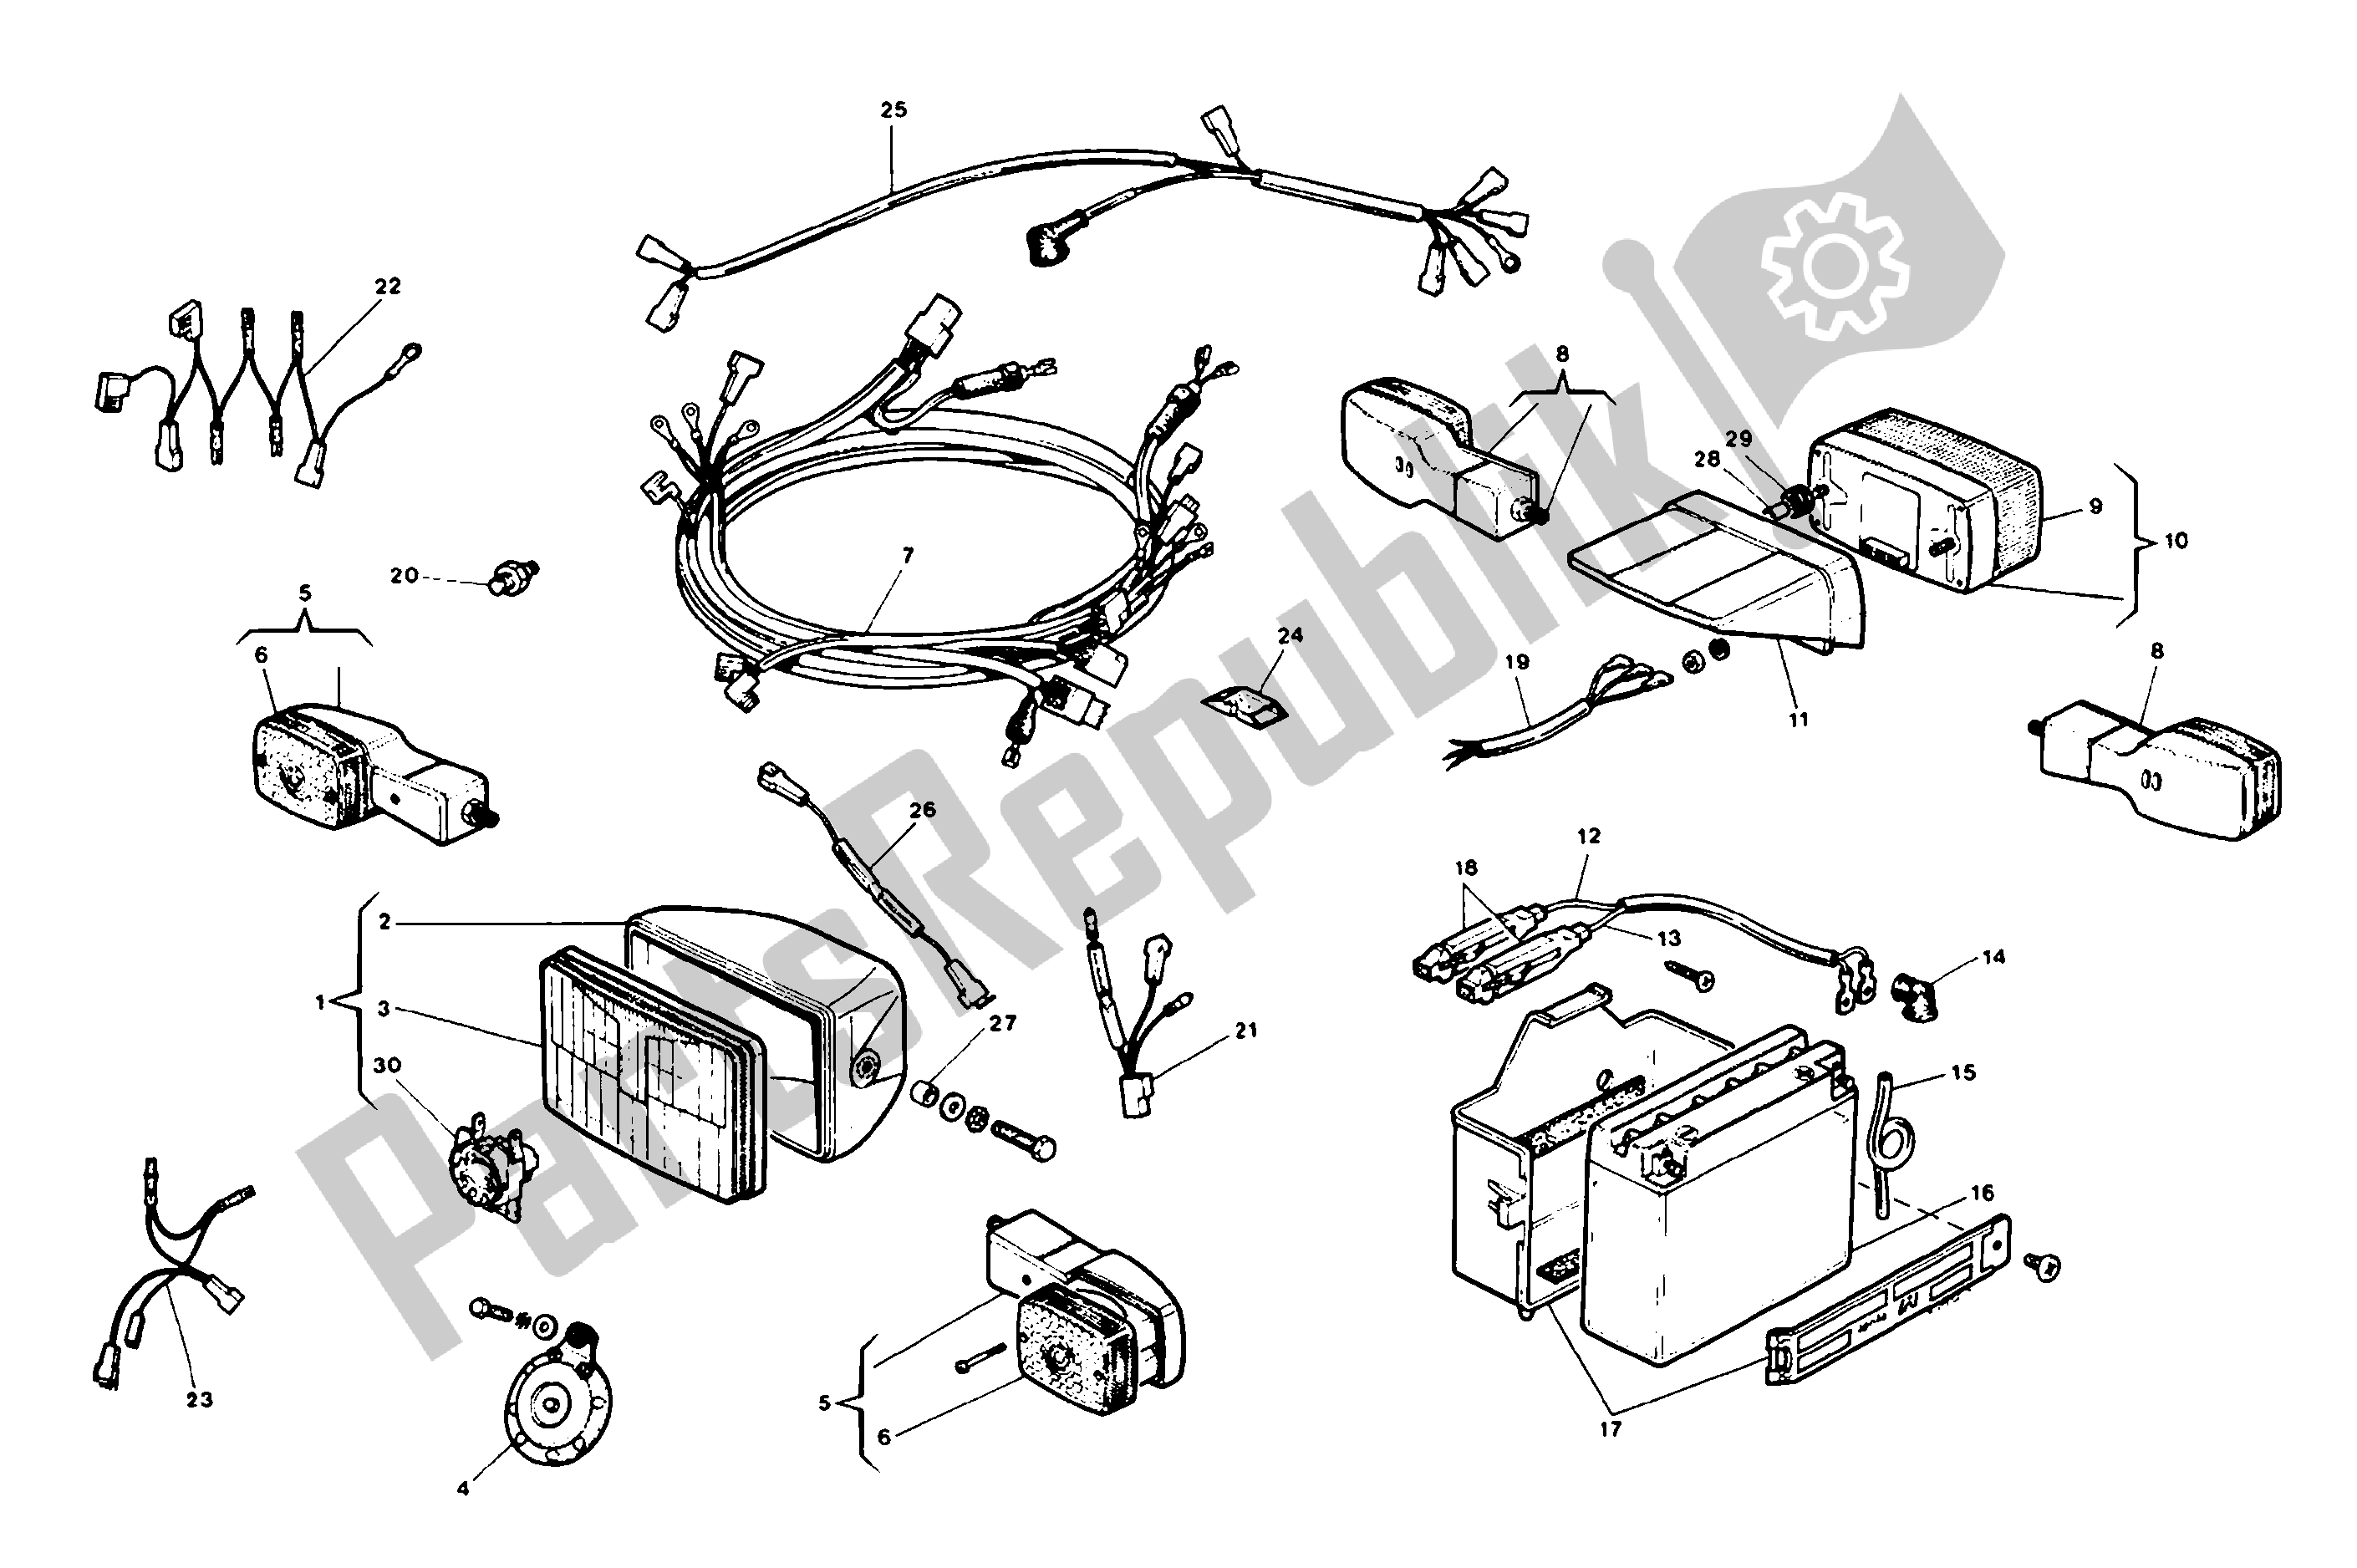 All parts for the Electrical Equipment of the Aprilia ETX 125 1984